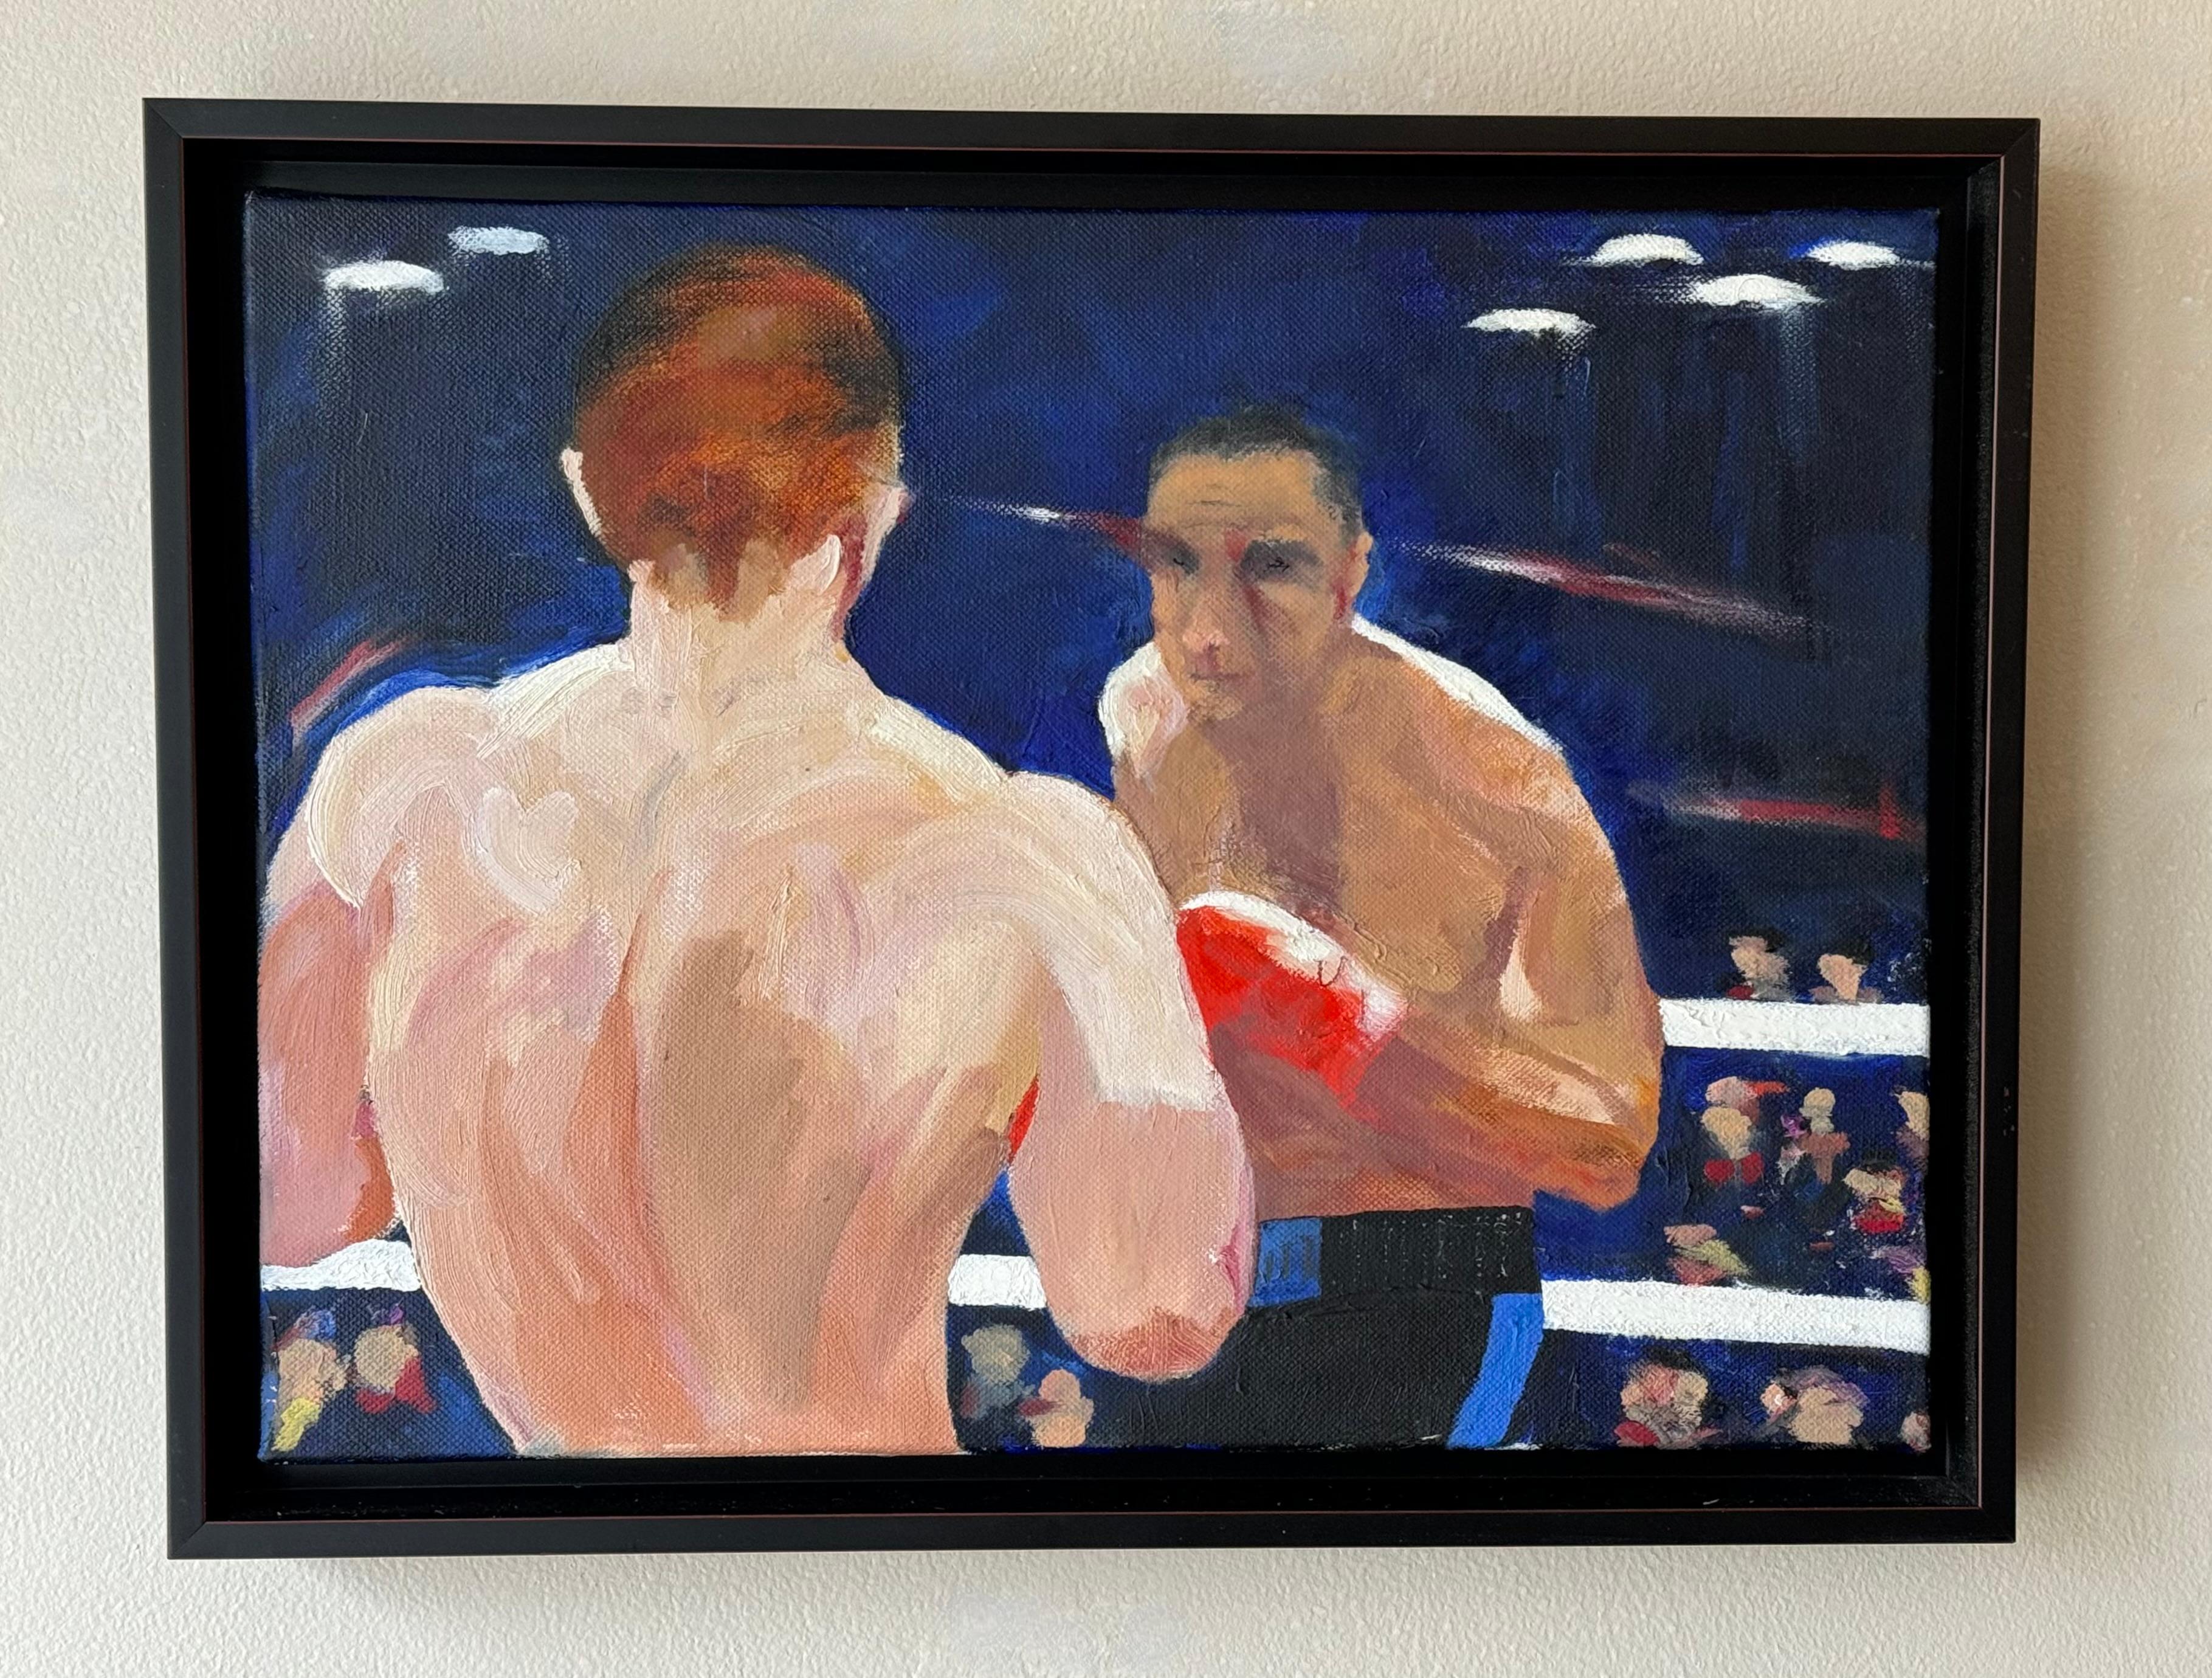 Acrylic on canvas painting of two boxers in the ring with the spectators in the background. Done in a slightly figure abstract style with the look and feel of the 1950s. The canvas itself is floats in the frame which is black with a stripe of red